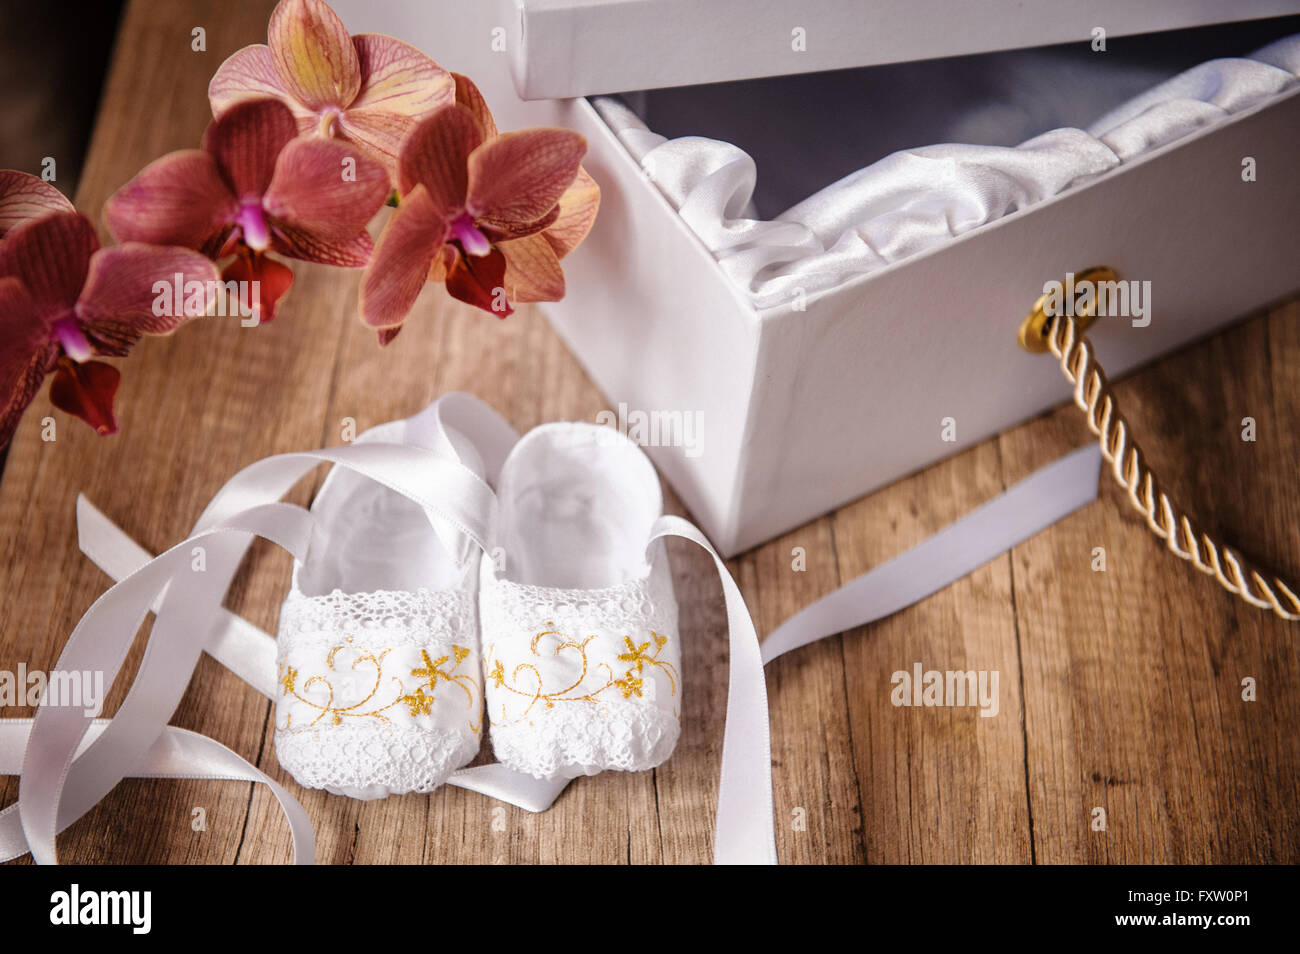 pair of Childrens ballet shoes worn and flowers Stock Photo